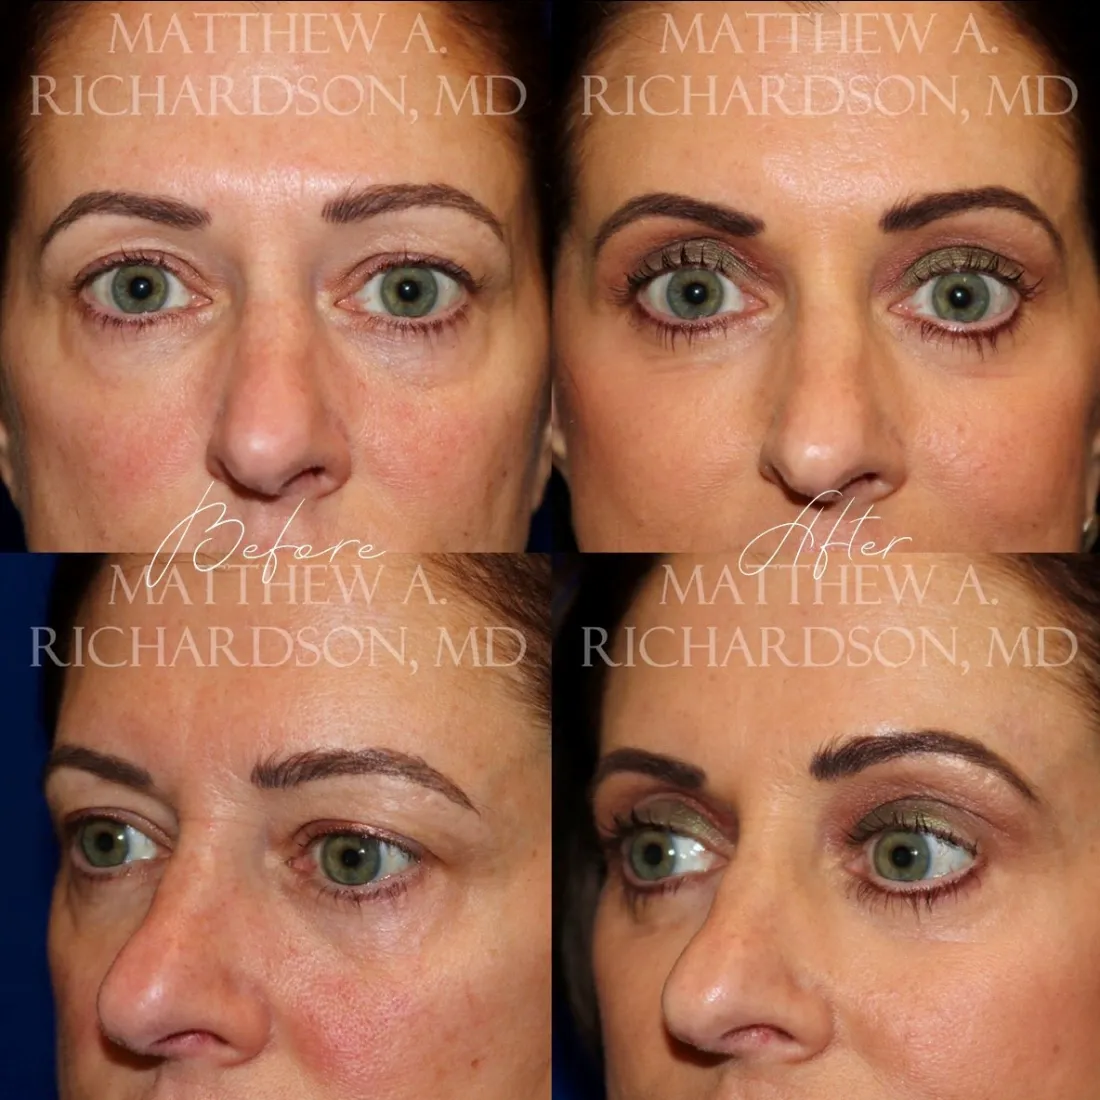 Brow Lift before and after performed by Matthew A. Richardson, MD